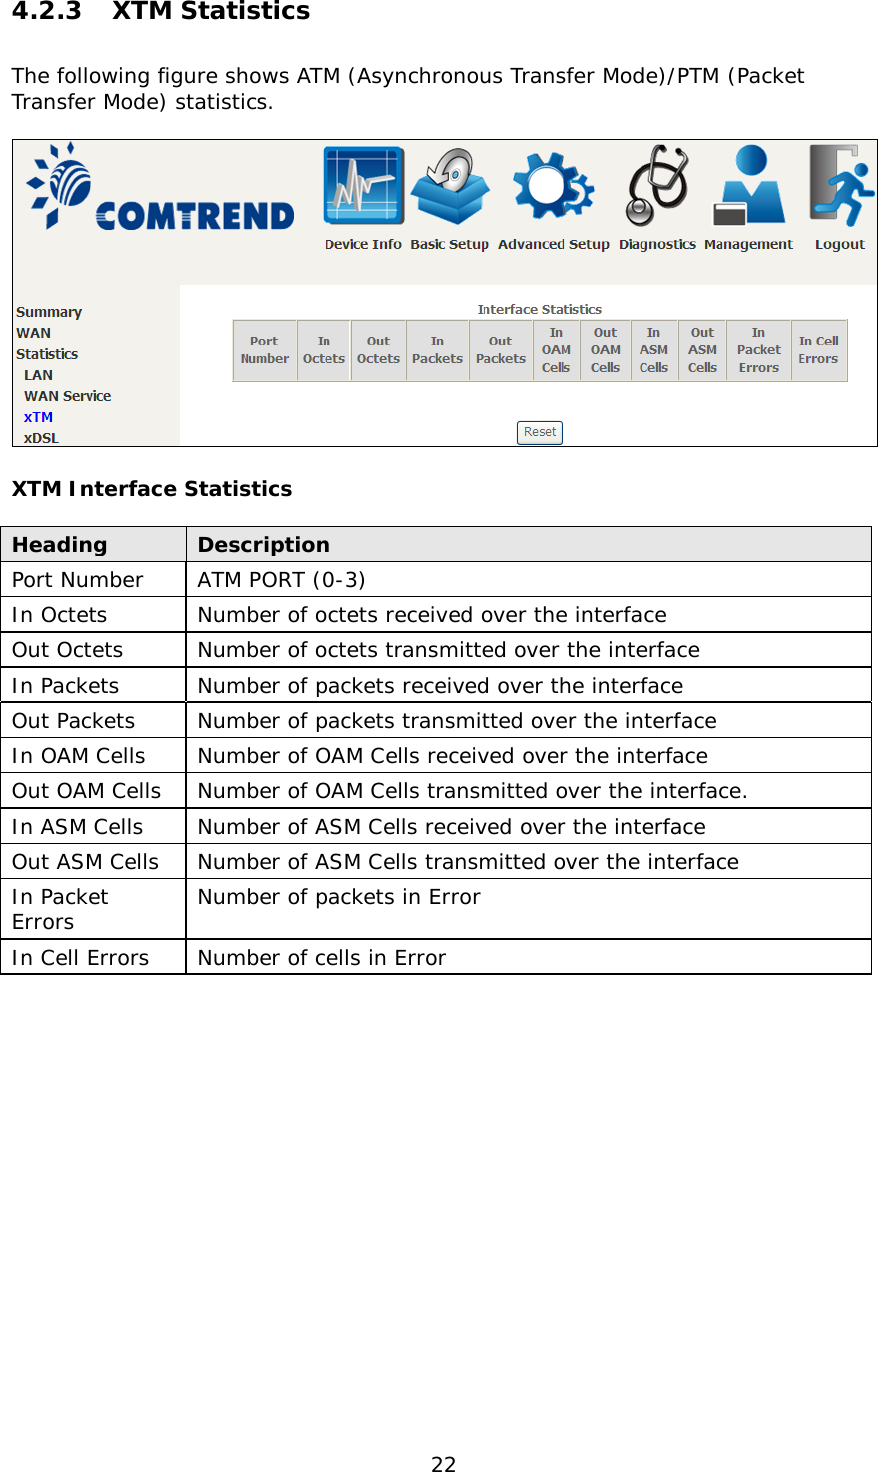  22 4.2.3  XTM Statistics The following figure shows ATM (Asynchronous Transfer Mode)/PTM (Packet Transfer Mode) statistics.   XTM Interface Statistics  Heading Description Port Number ATM PORT (0-3) In Octets Number of octets received over the interface Out Octets Number of octets transmitted over the interface In Packets Number of packets received over the interface Out Packets Number of packets transmitted over the interface In OAM Cells Number of OAM Cells received over the interface Out OAM Cells Number of OAM Cells transmitted over the interface. In ASM Cells Number of ASM Cells received over the interface Out ASM Cells Number of ASM Cells transmitted over the interface In Packet Errors Number of packets in Error In Cell Errors Number of cells in Error      